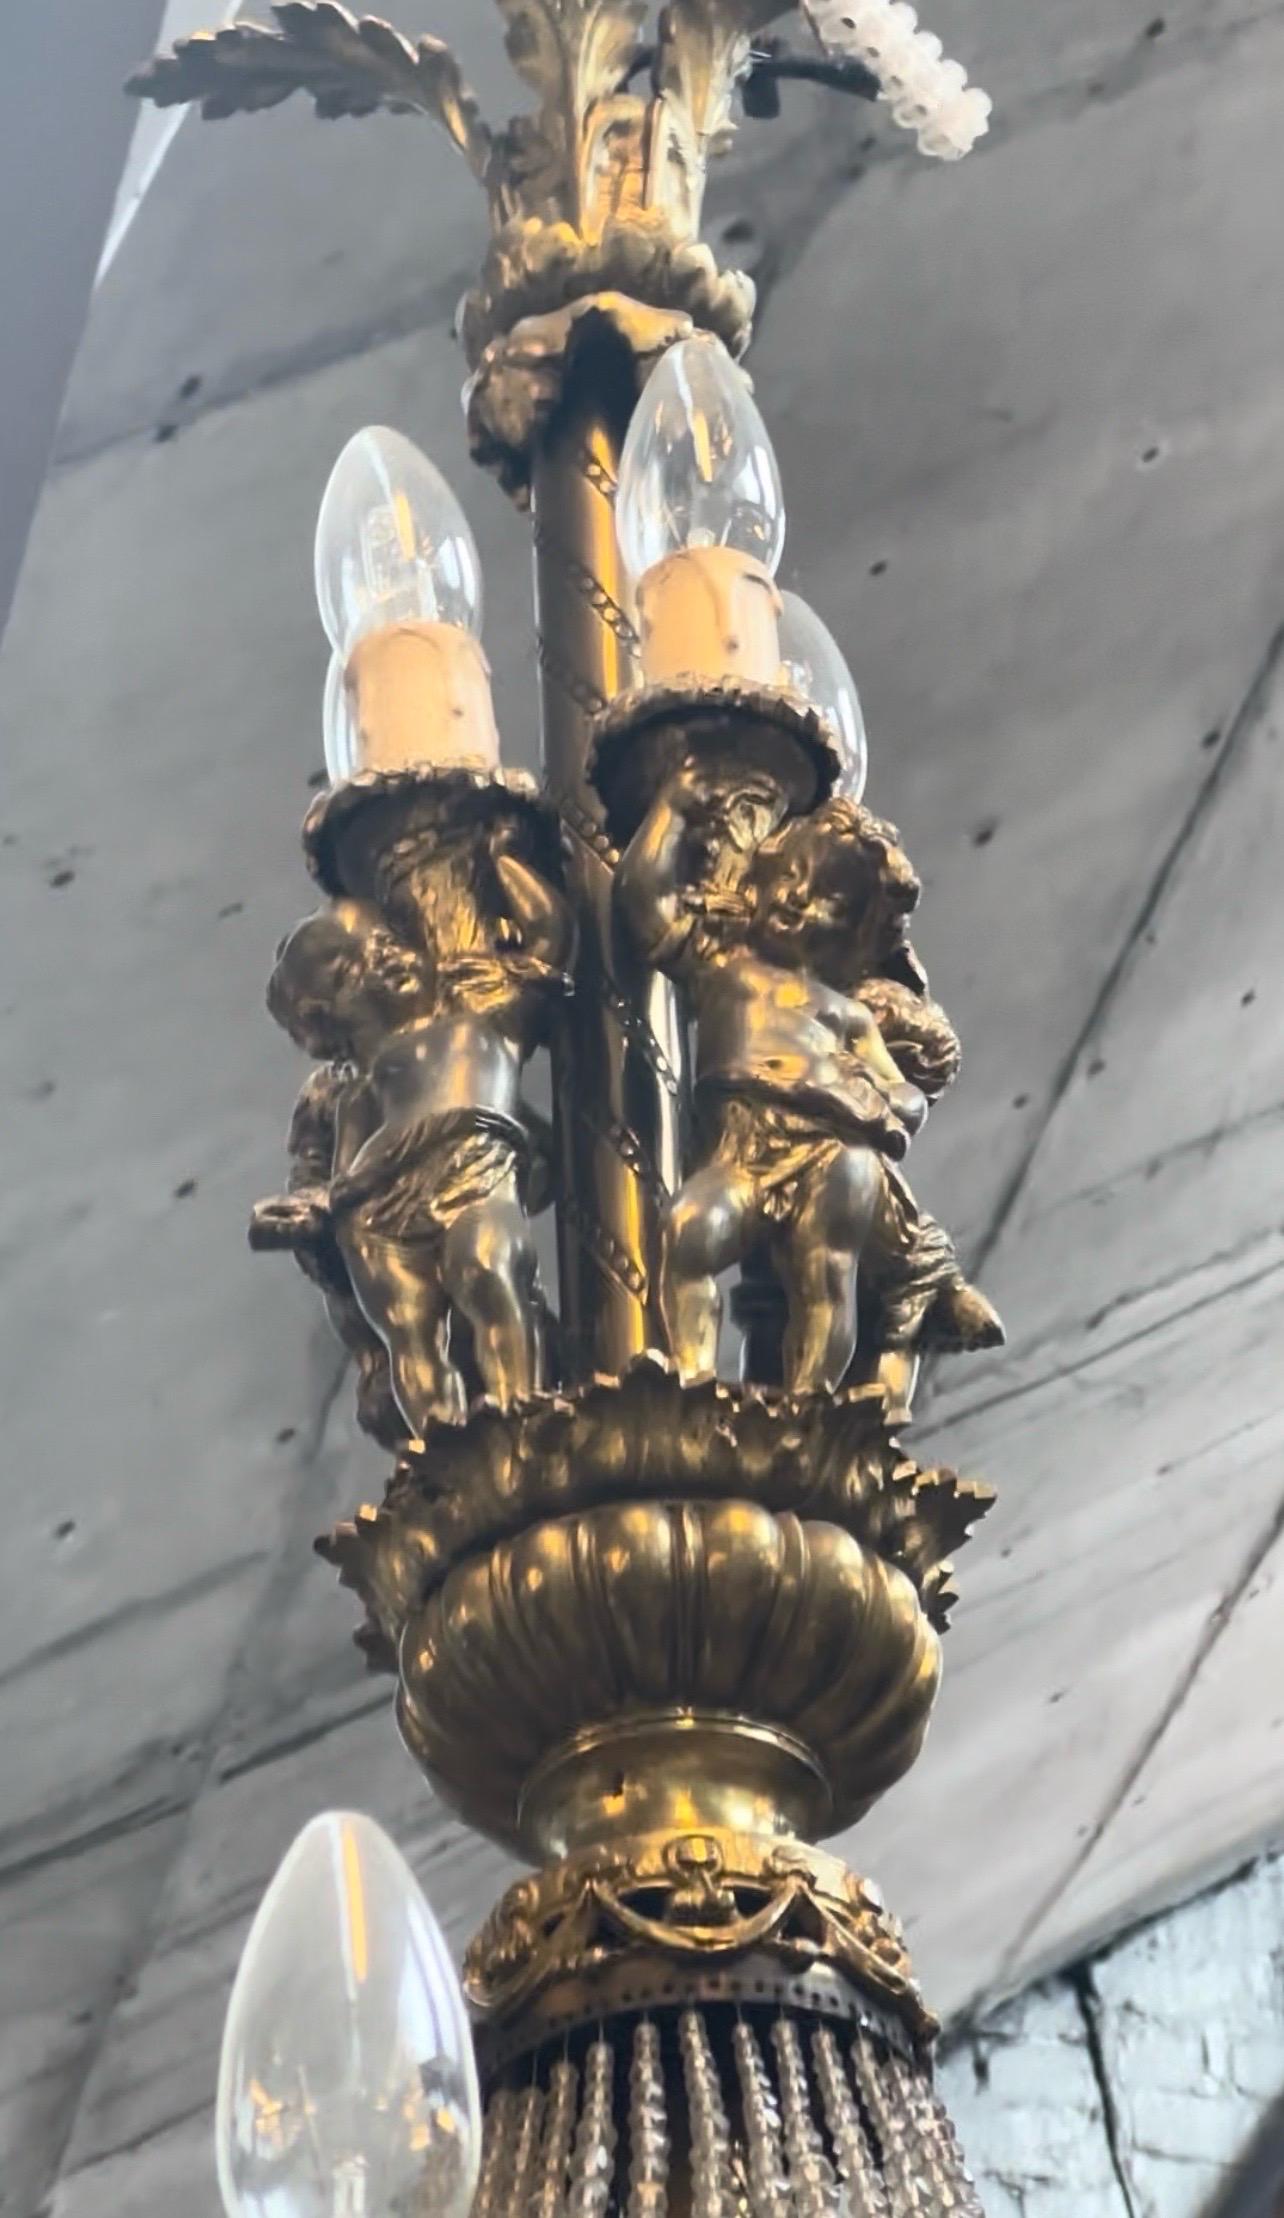 Flick through the images to see this beautiful bronze French empire chandelier and take a look at the intricate detailing throughout. 